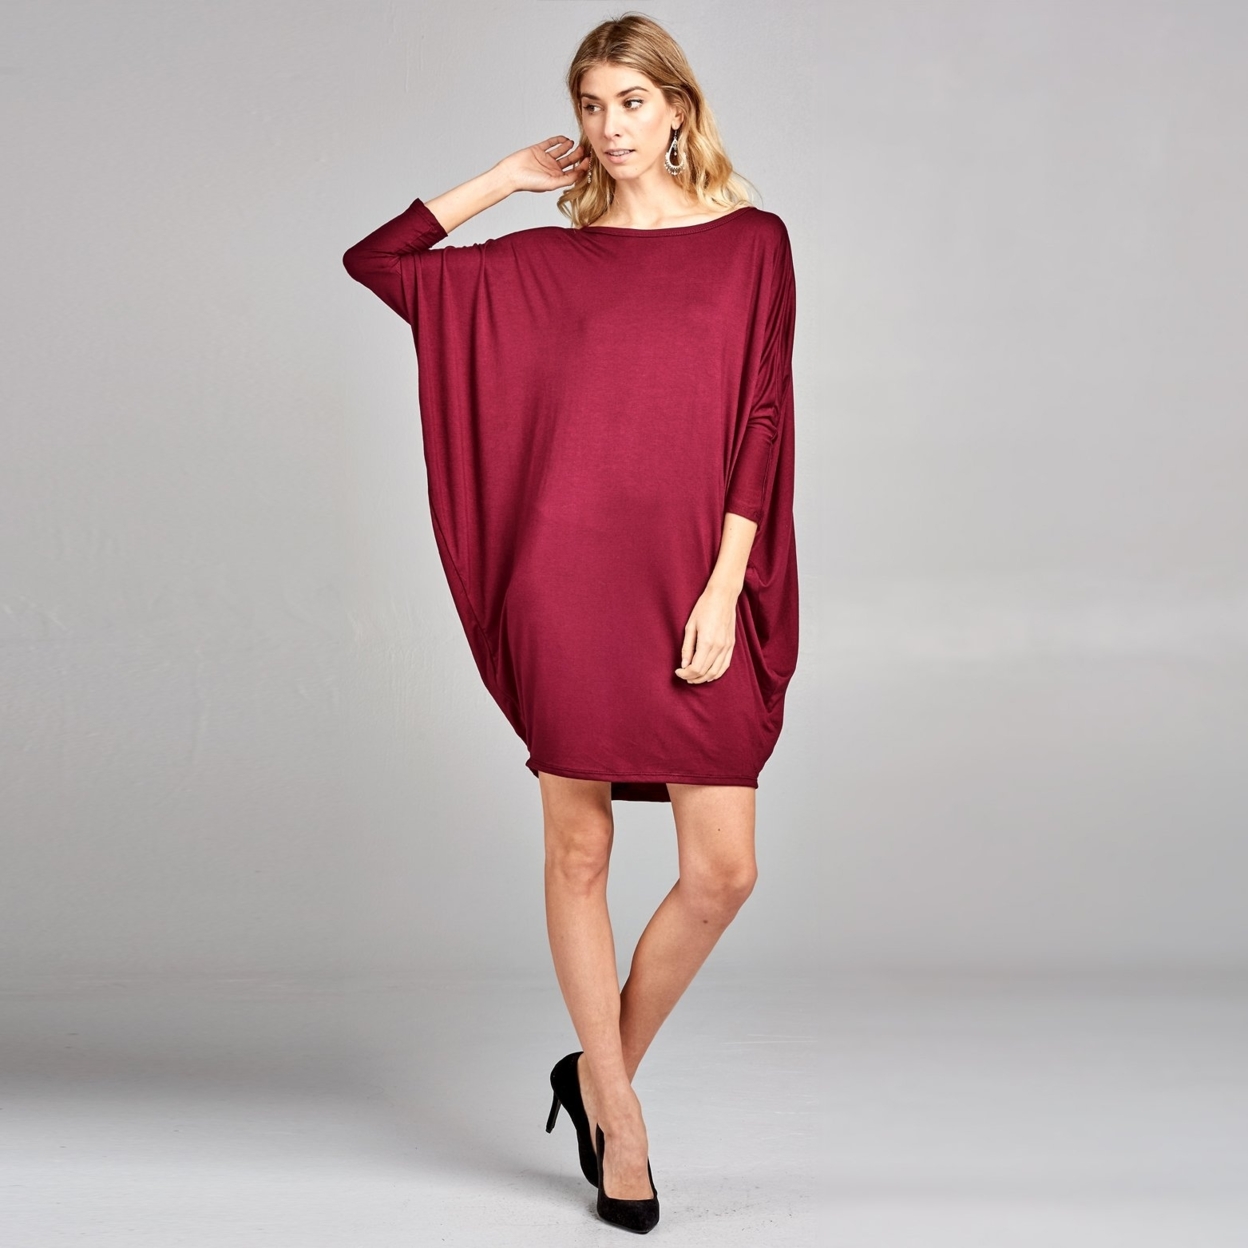 Dolman Cocoon Dress - Red Brown, Small (2-8)